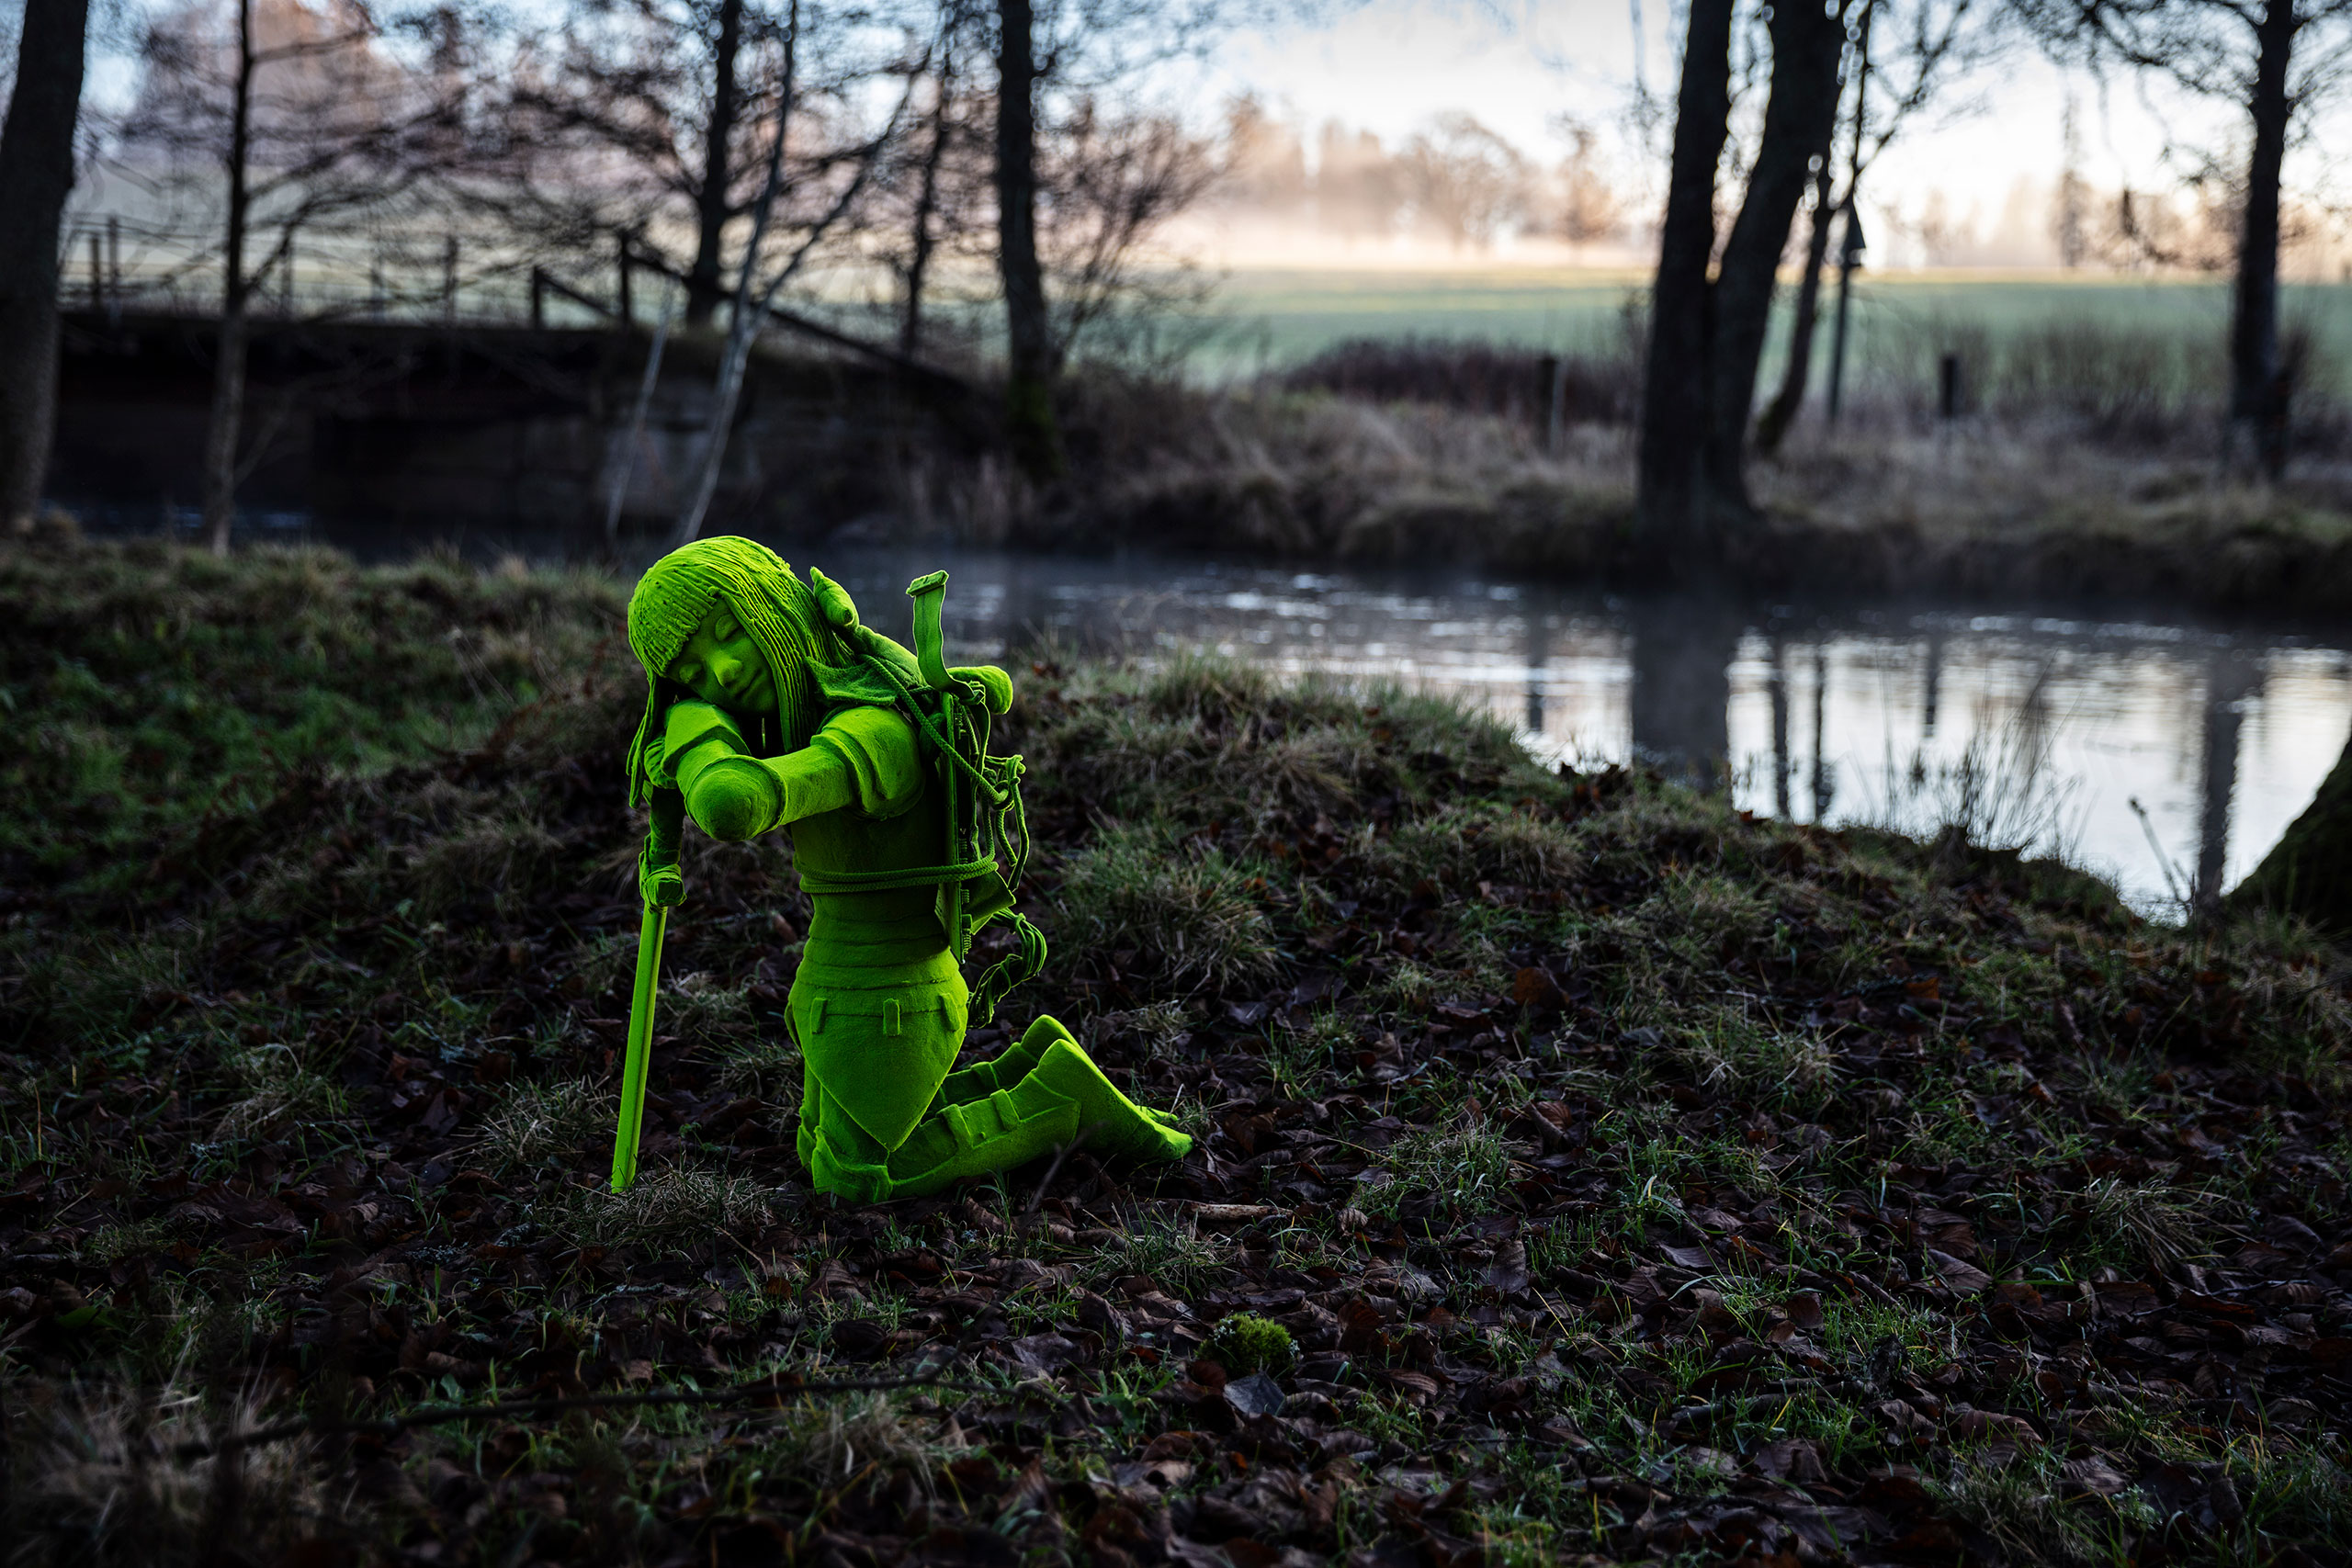 One of Kim Simonsson’s Moss Children photographed out in the landscape of the Finnish Countryside. Photography by Jefunne Gimpel, courtesy of the artist.